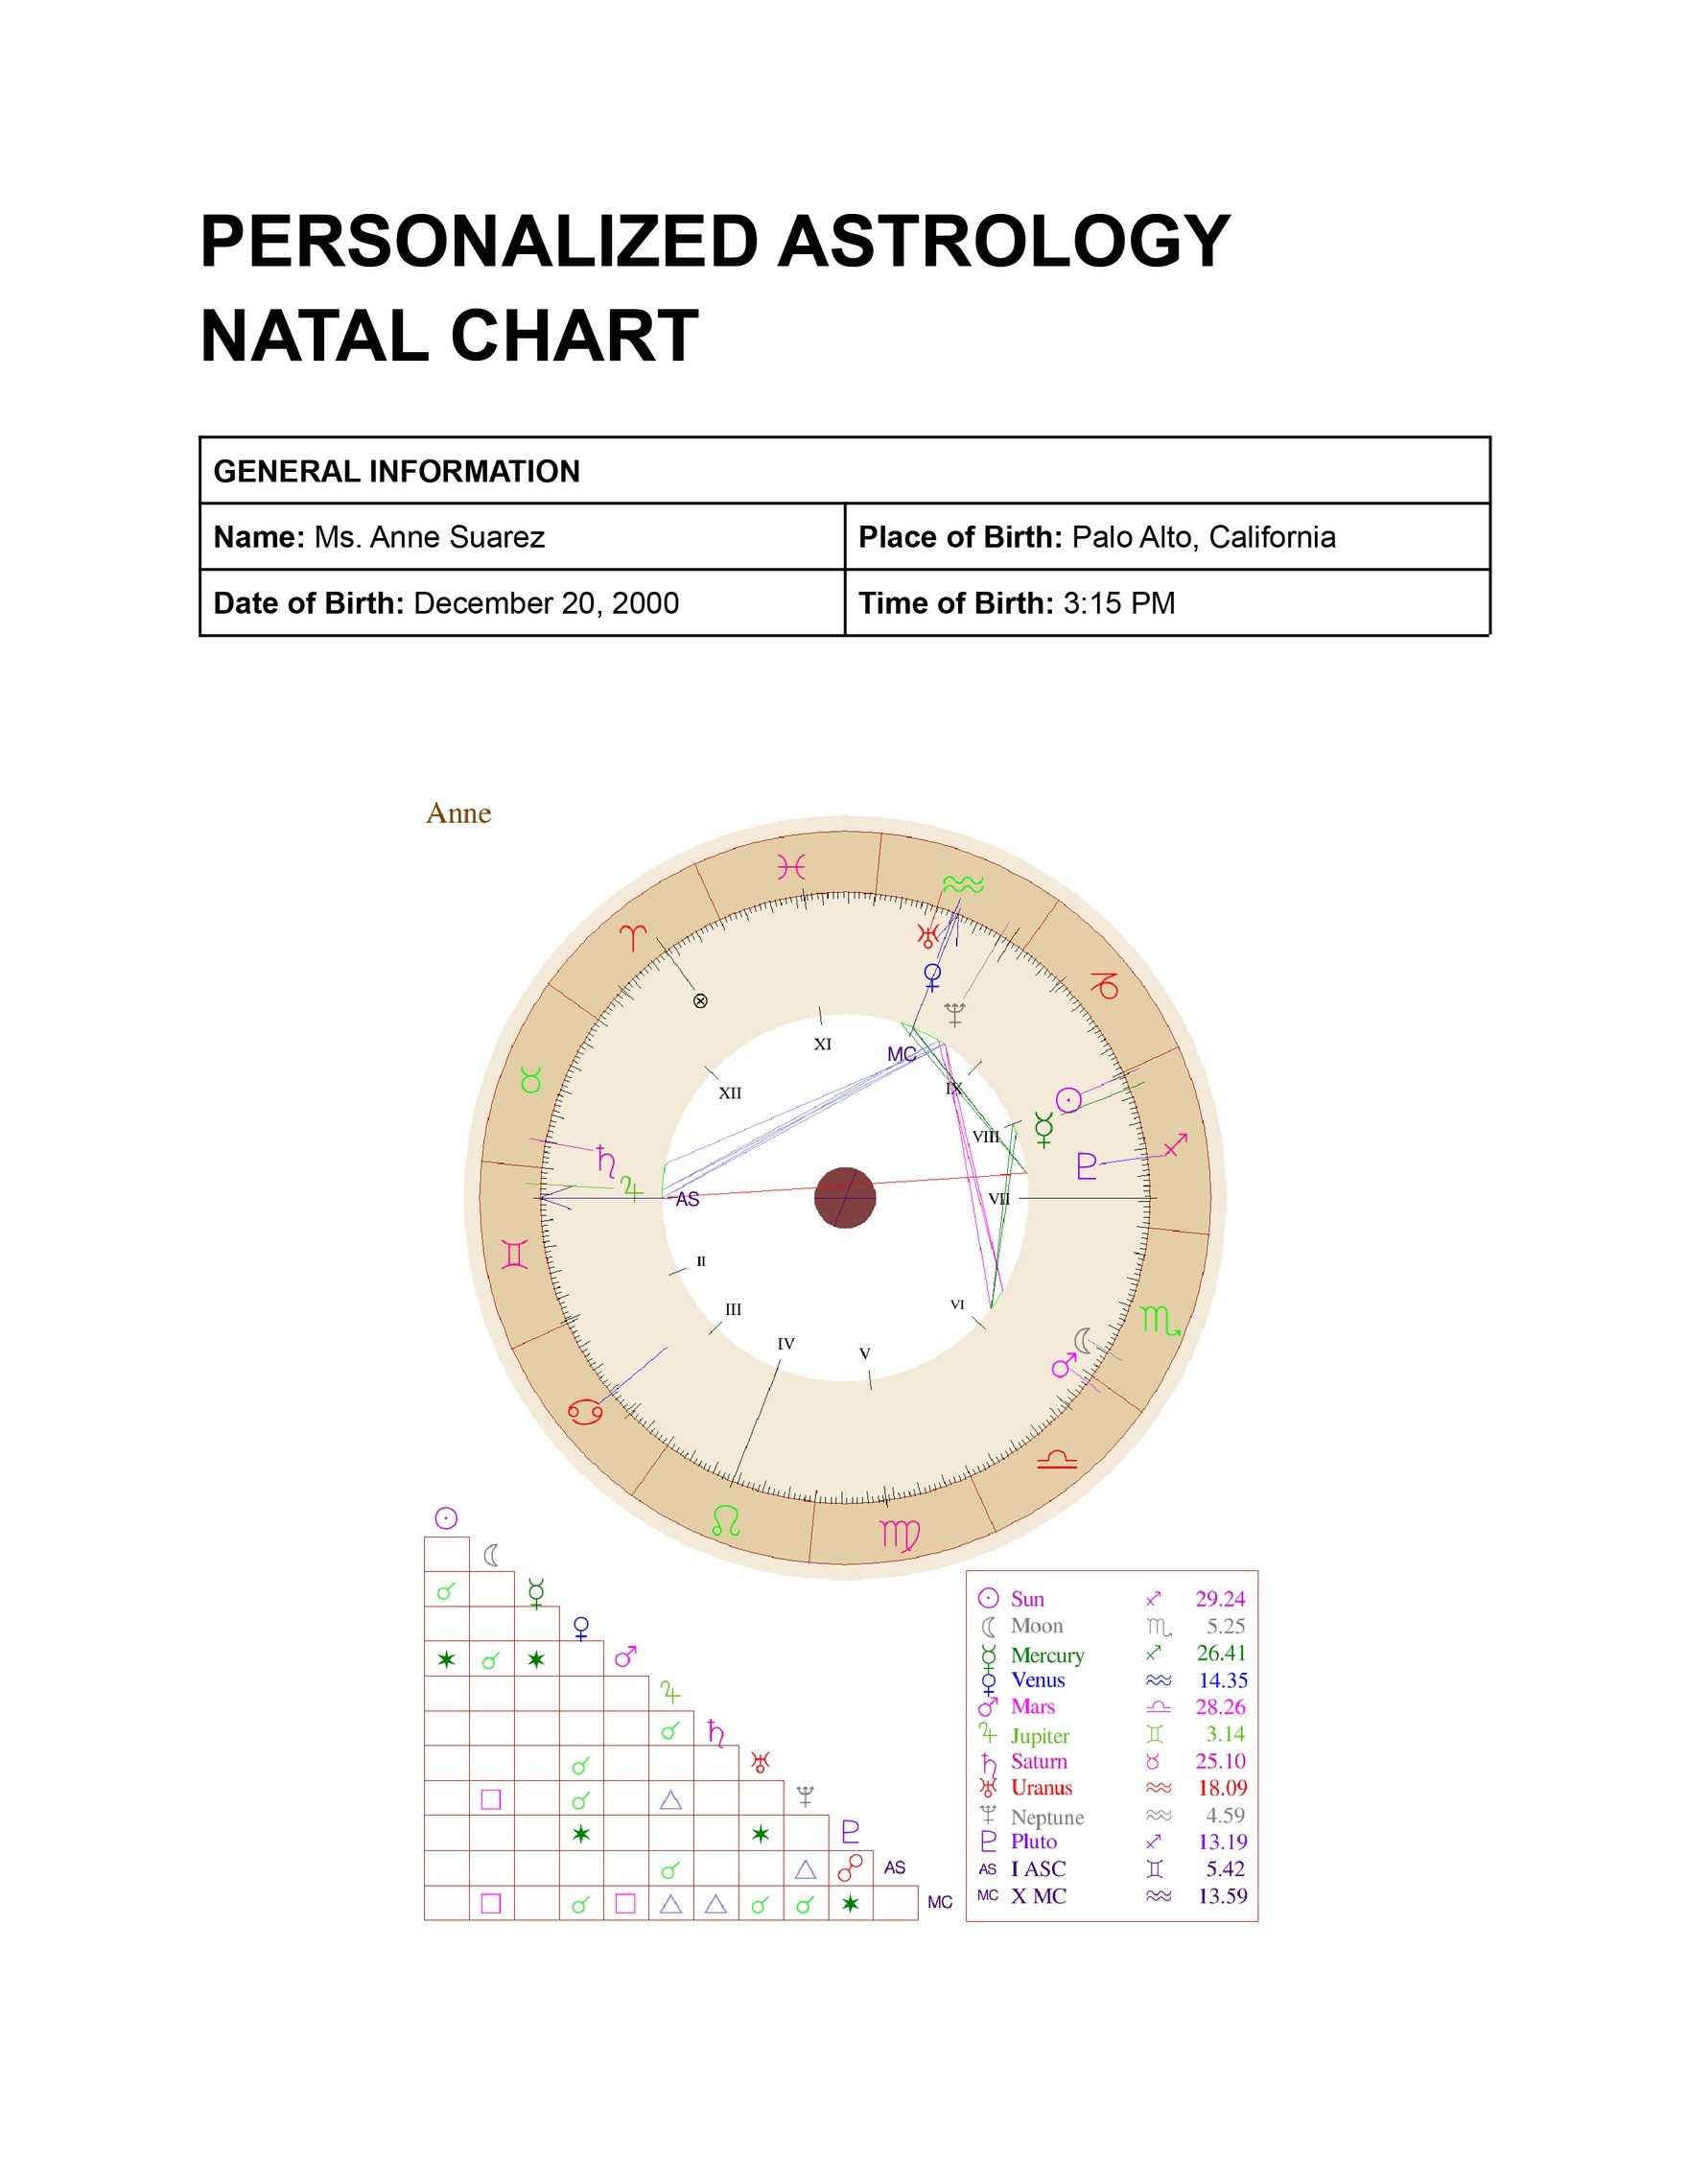 Free Personalized Astrology Natal Chart Template in PDF, Illustrator